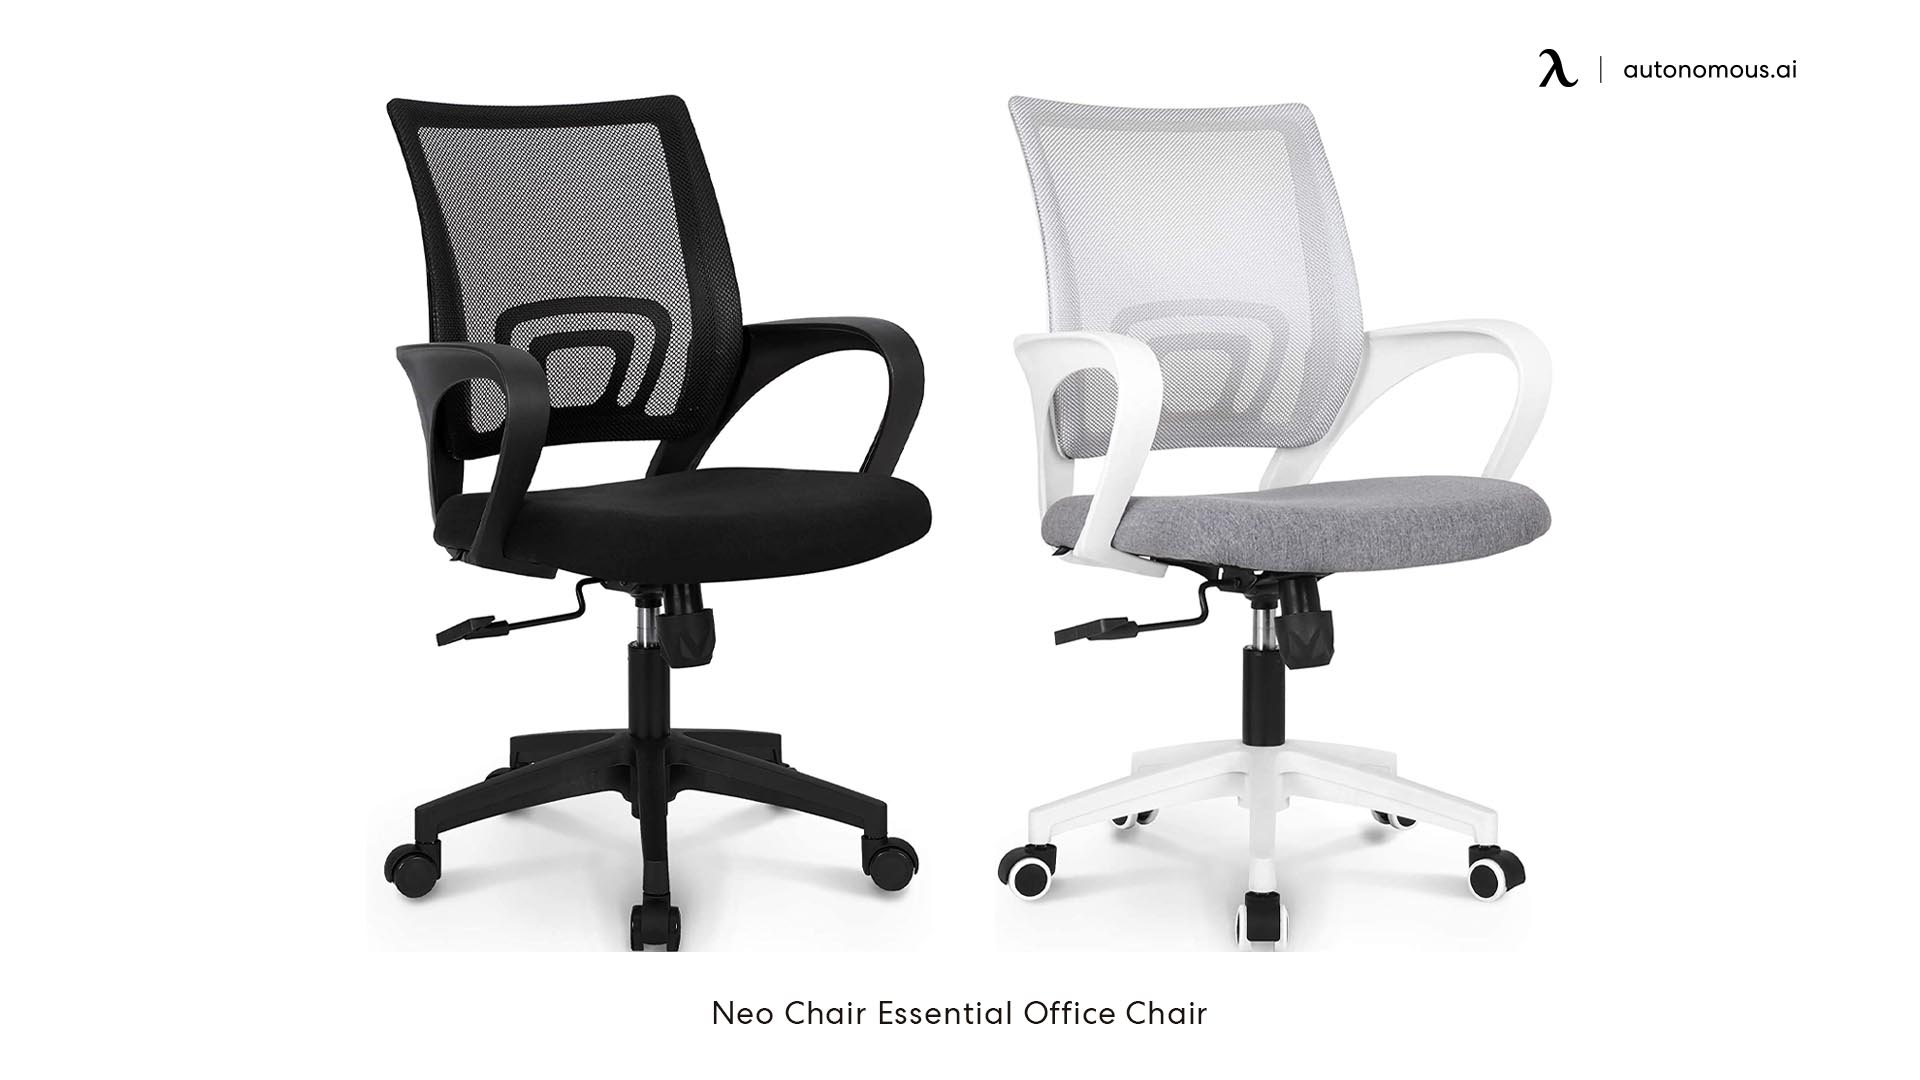 Neo Chair Essential Office Chair